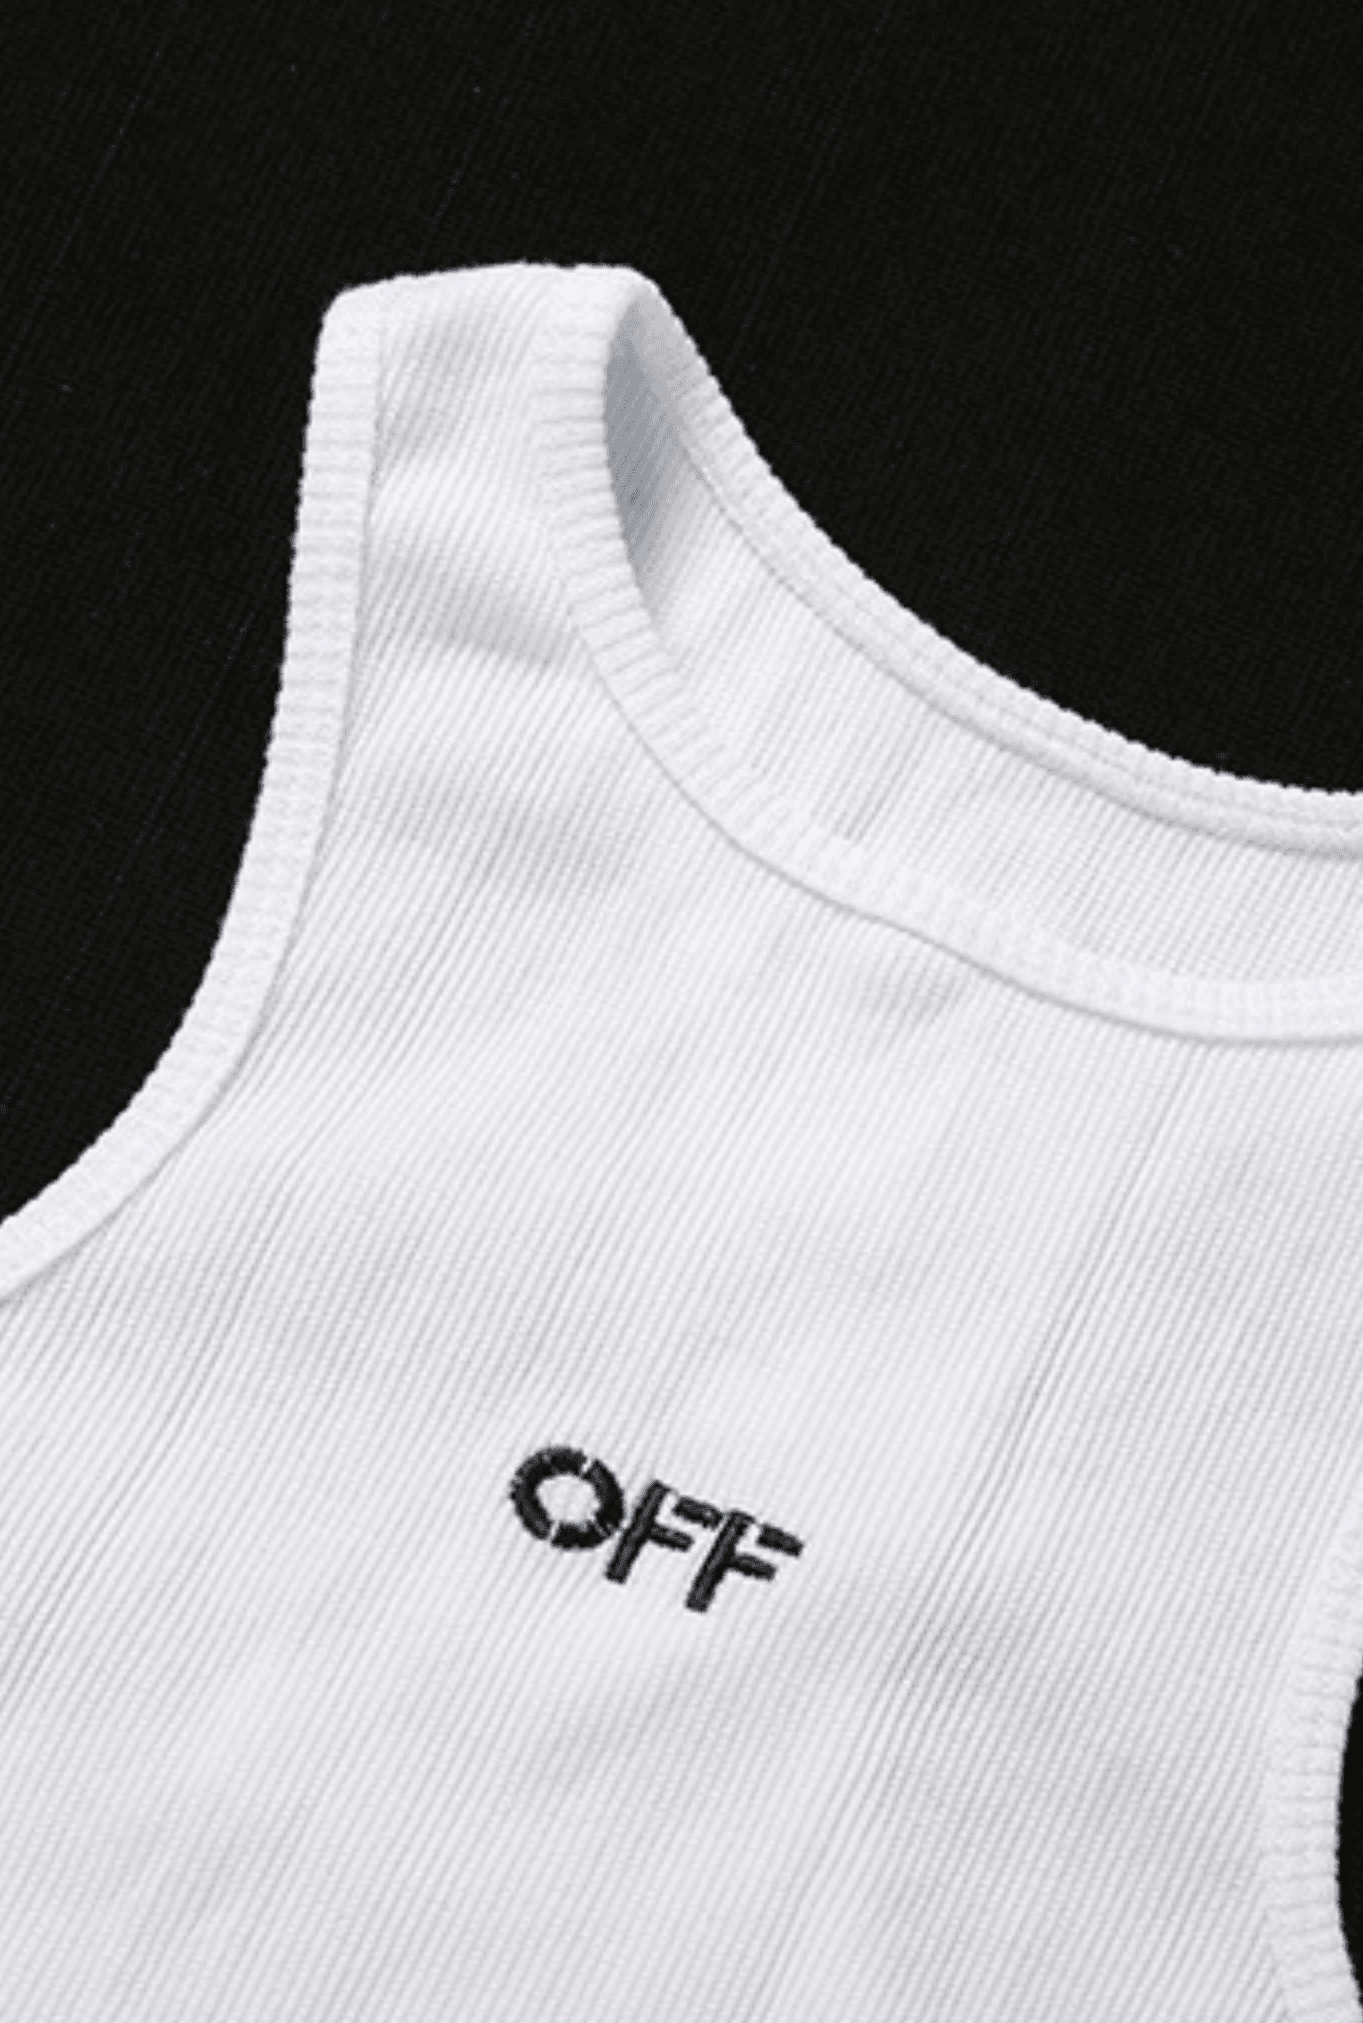 'OFF' Cropped Tank Top - shopuntitled.co